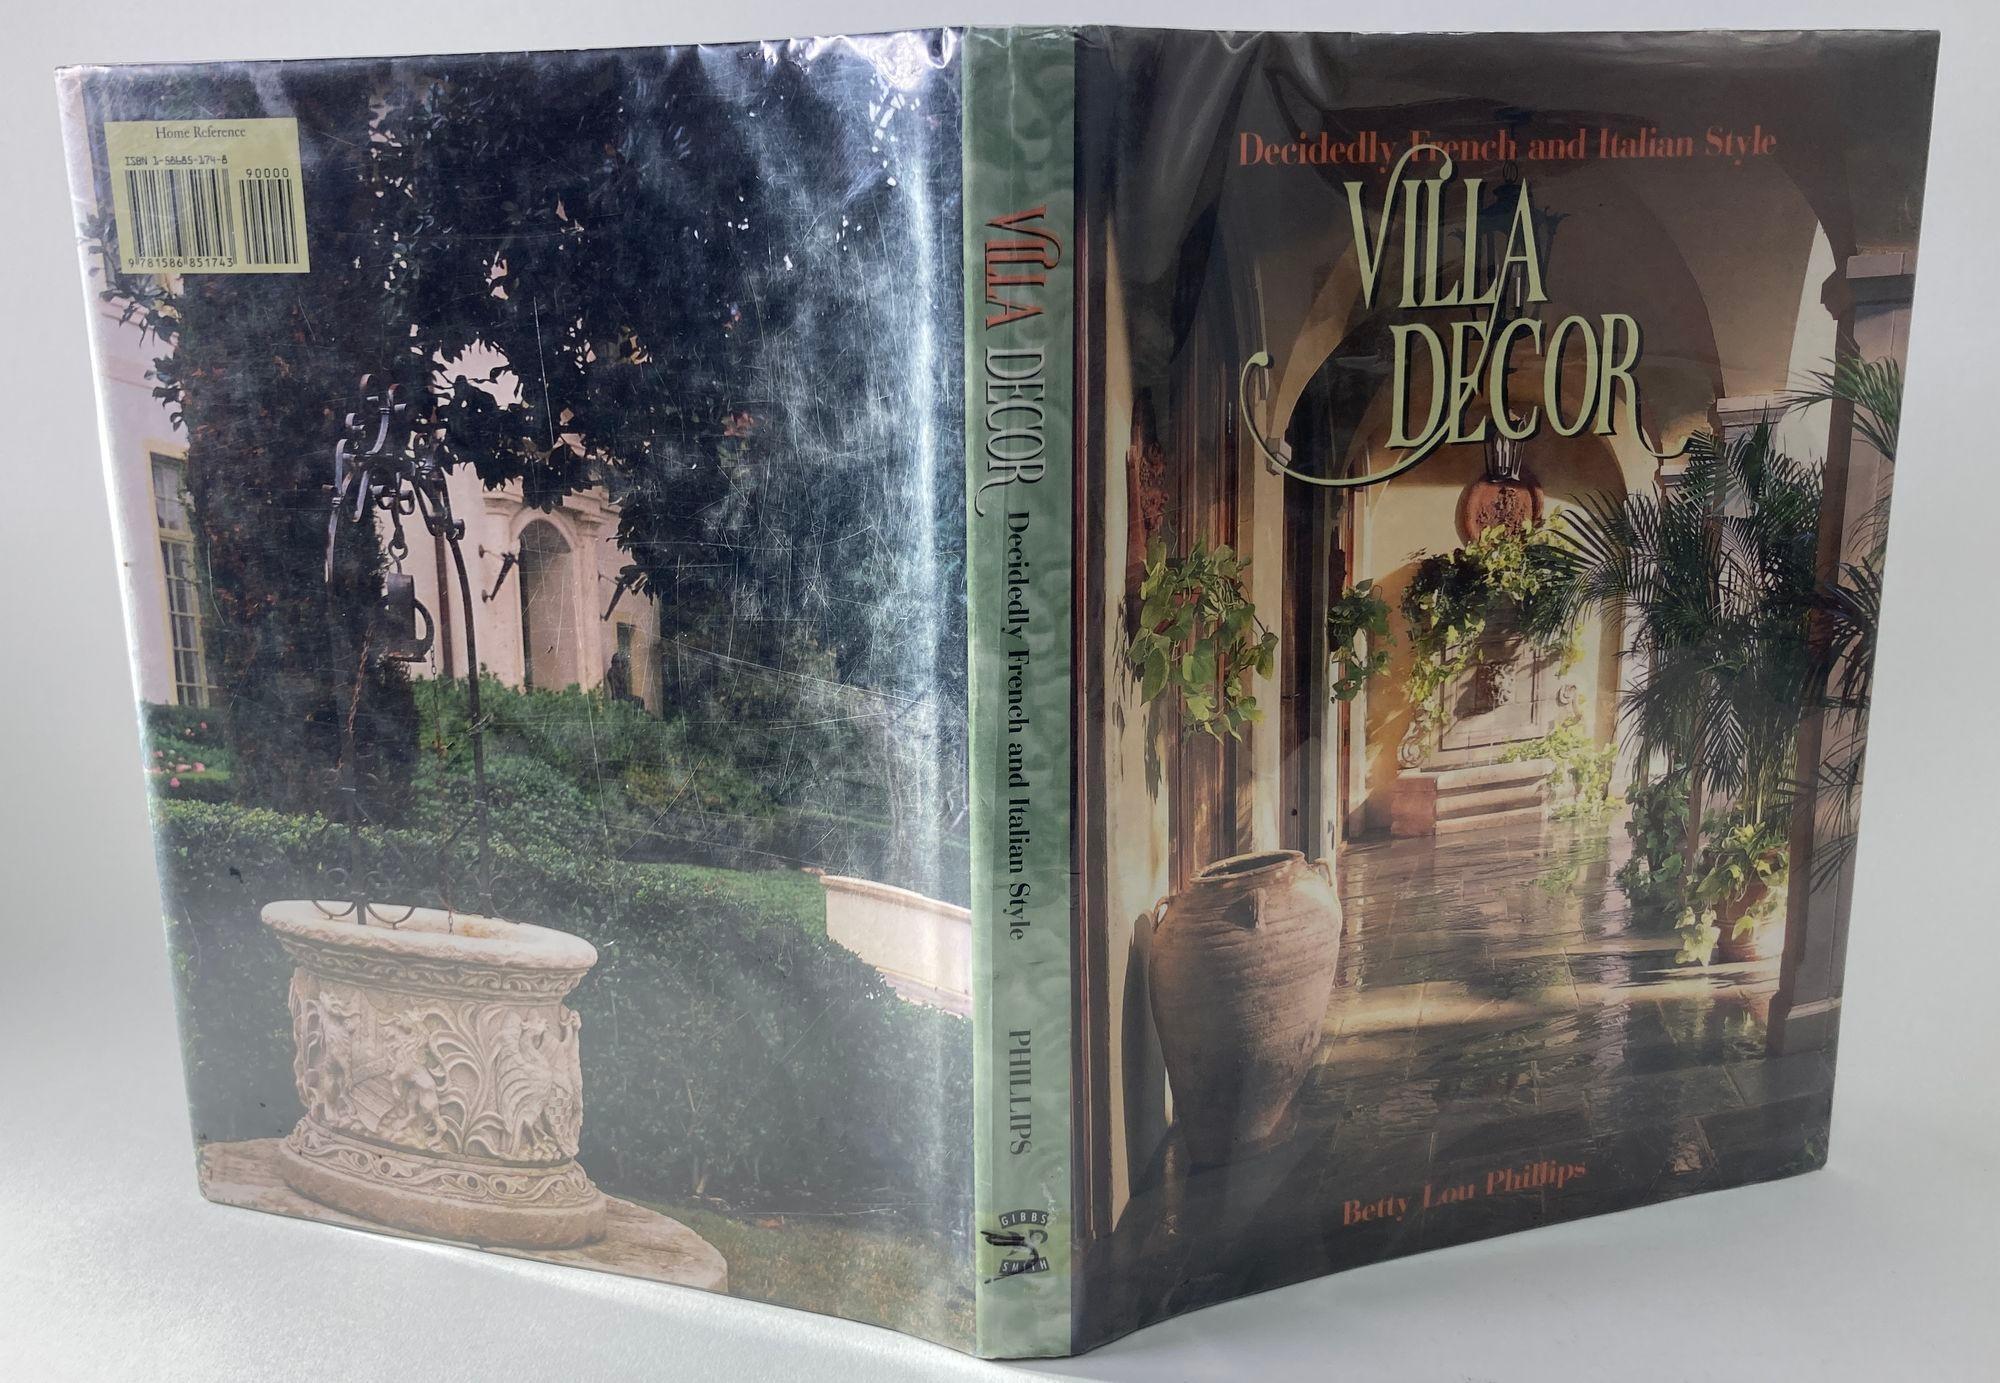 Villa Decor: Decidedly French and Italian Style Hardcover by Betty Lou Phillips For Sale 1